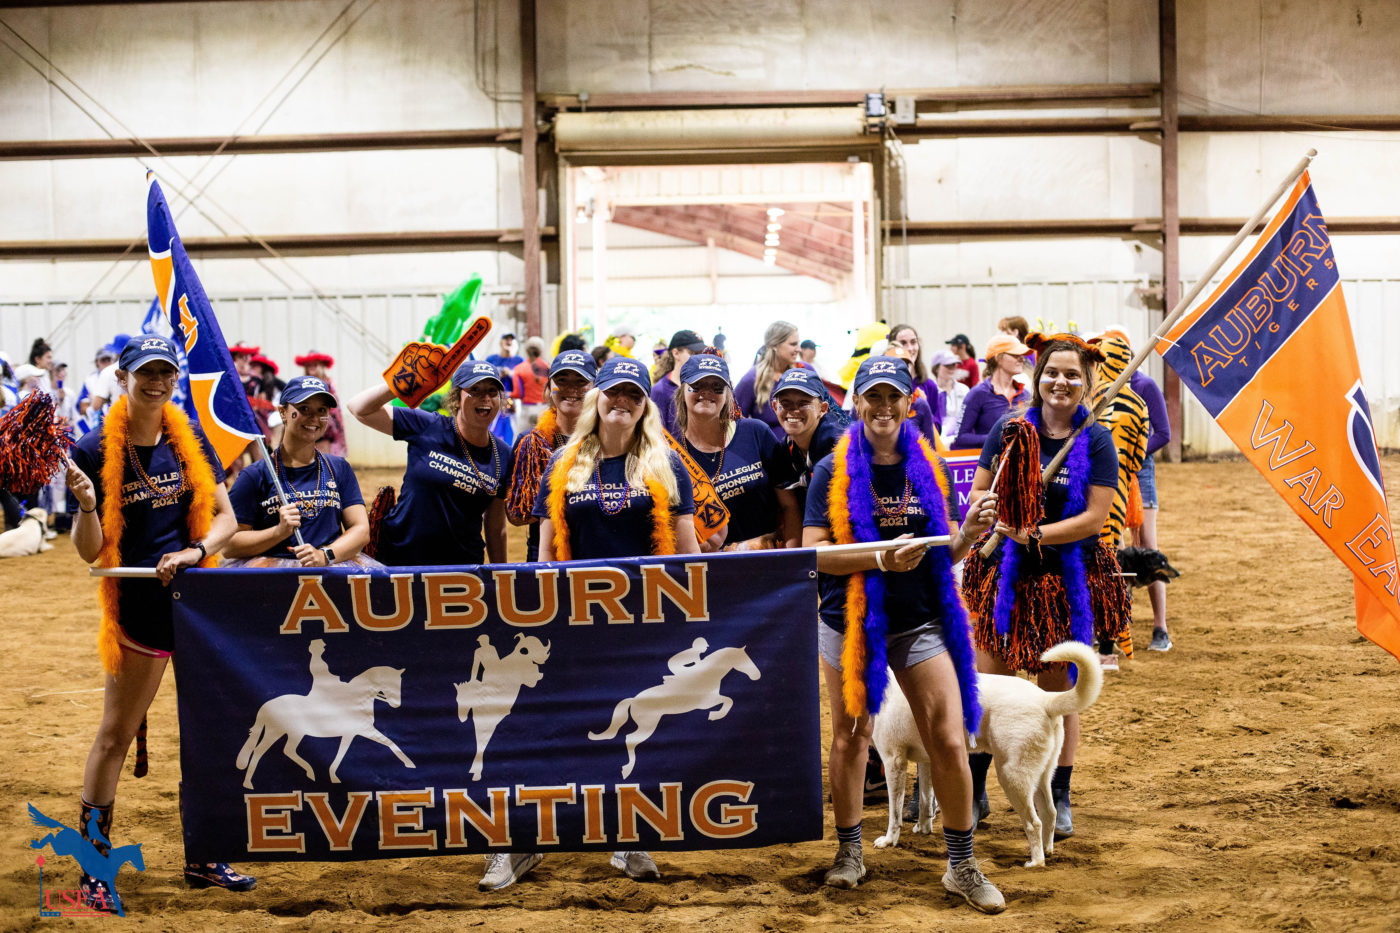 They've got spirit, yes they do! Auburn Eventing took home the highly coveted spirit award this year.